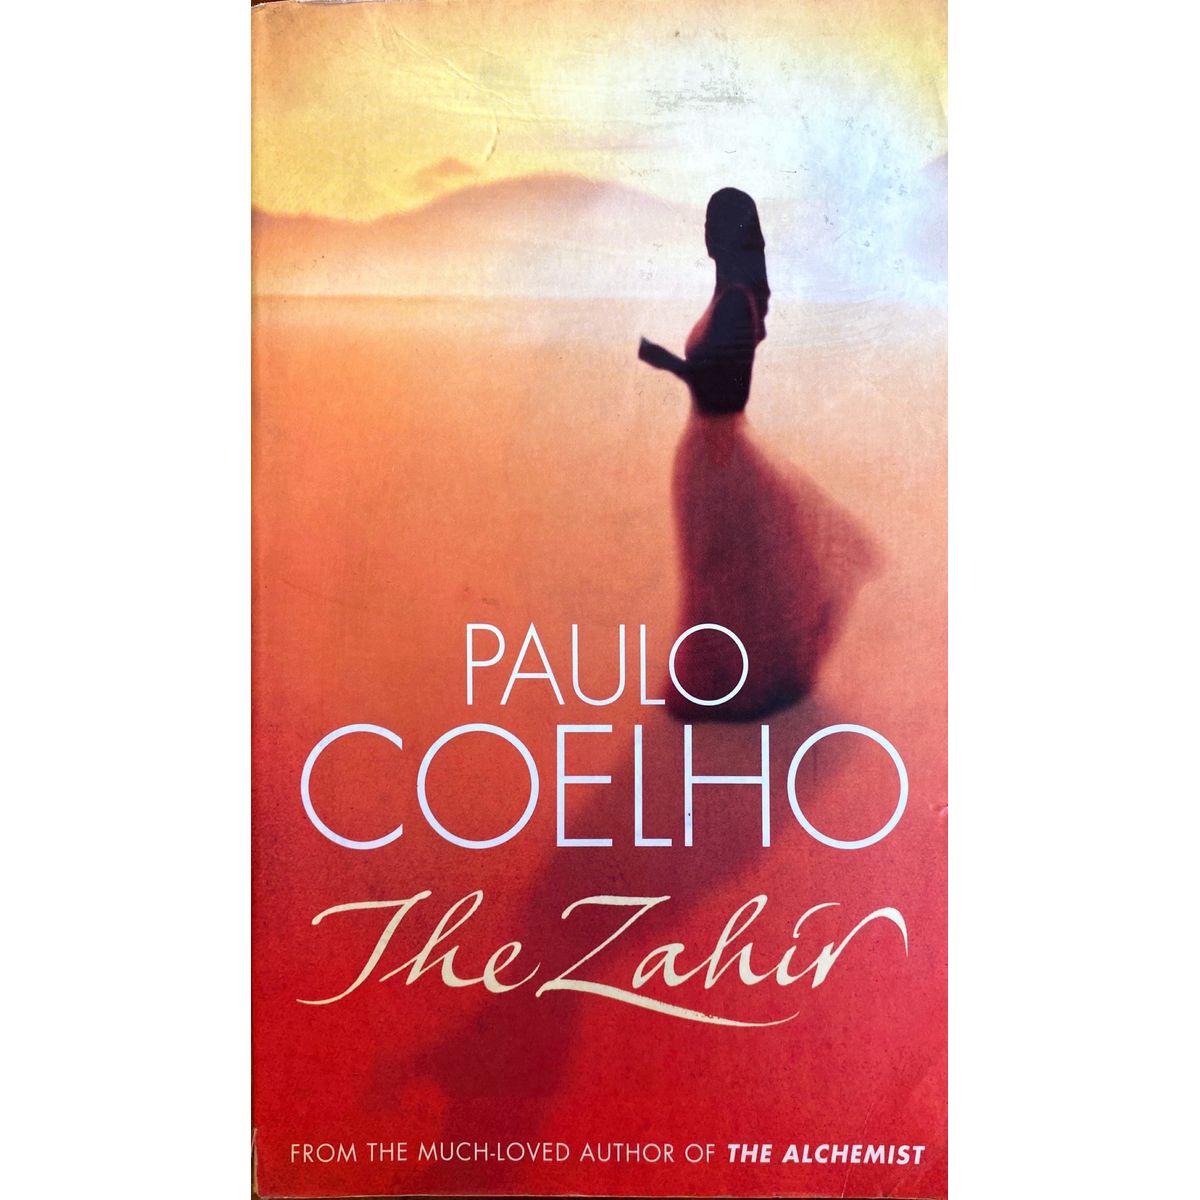 ISBN: 9780007204311 / 0007204310 - The Zahir: A Novel of Love, Longing and Obsession by Paulo Coelho, translated by Margaret Jull [2005]